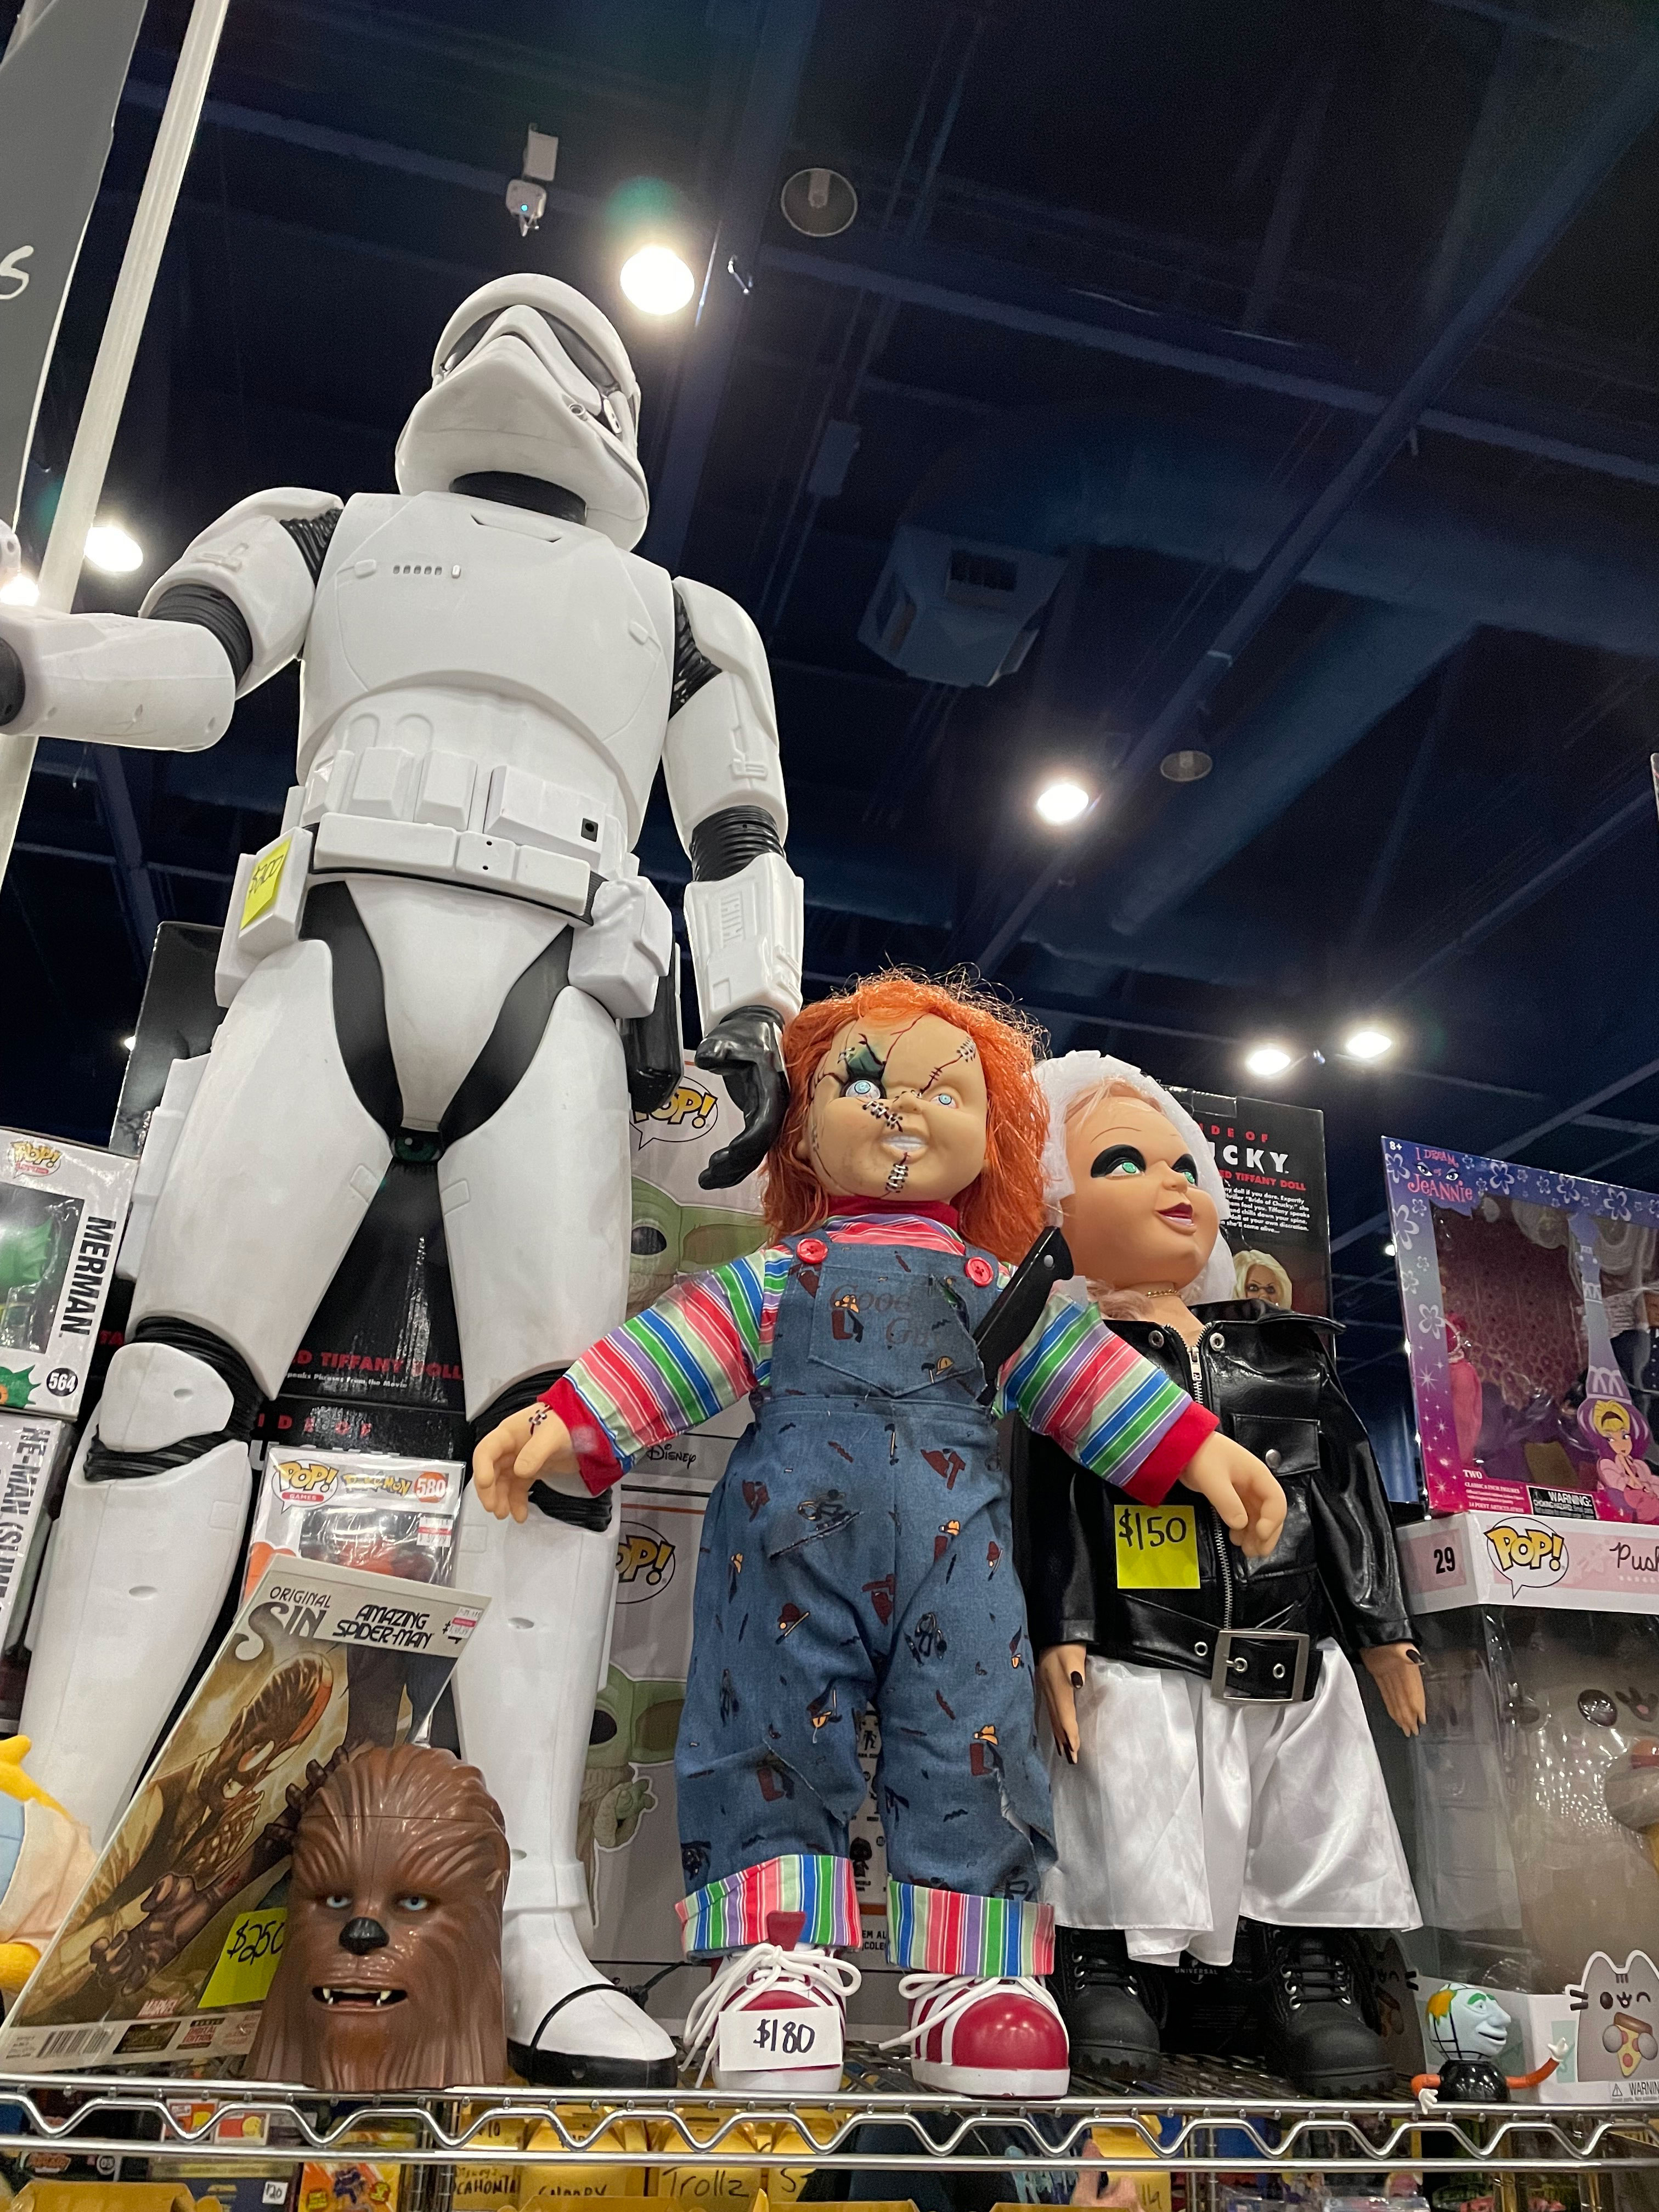 PHOTO: Image shows multiple figurines, including one of horror movie characters Chucky and Tiffany, as well as a storm trooper from Star Wars. The head of Star Wars character Chewbacca can also be seen. Photo by The Signal Managing Editor of Content and Operations Troylon Griffin II.